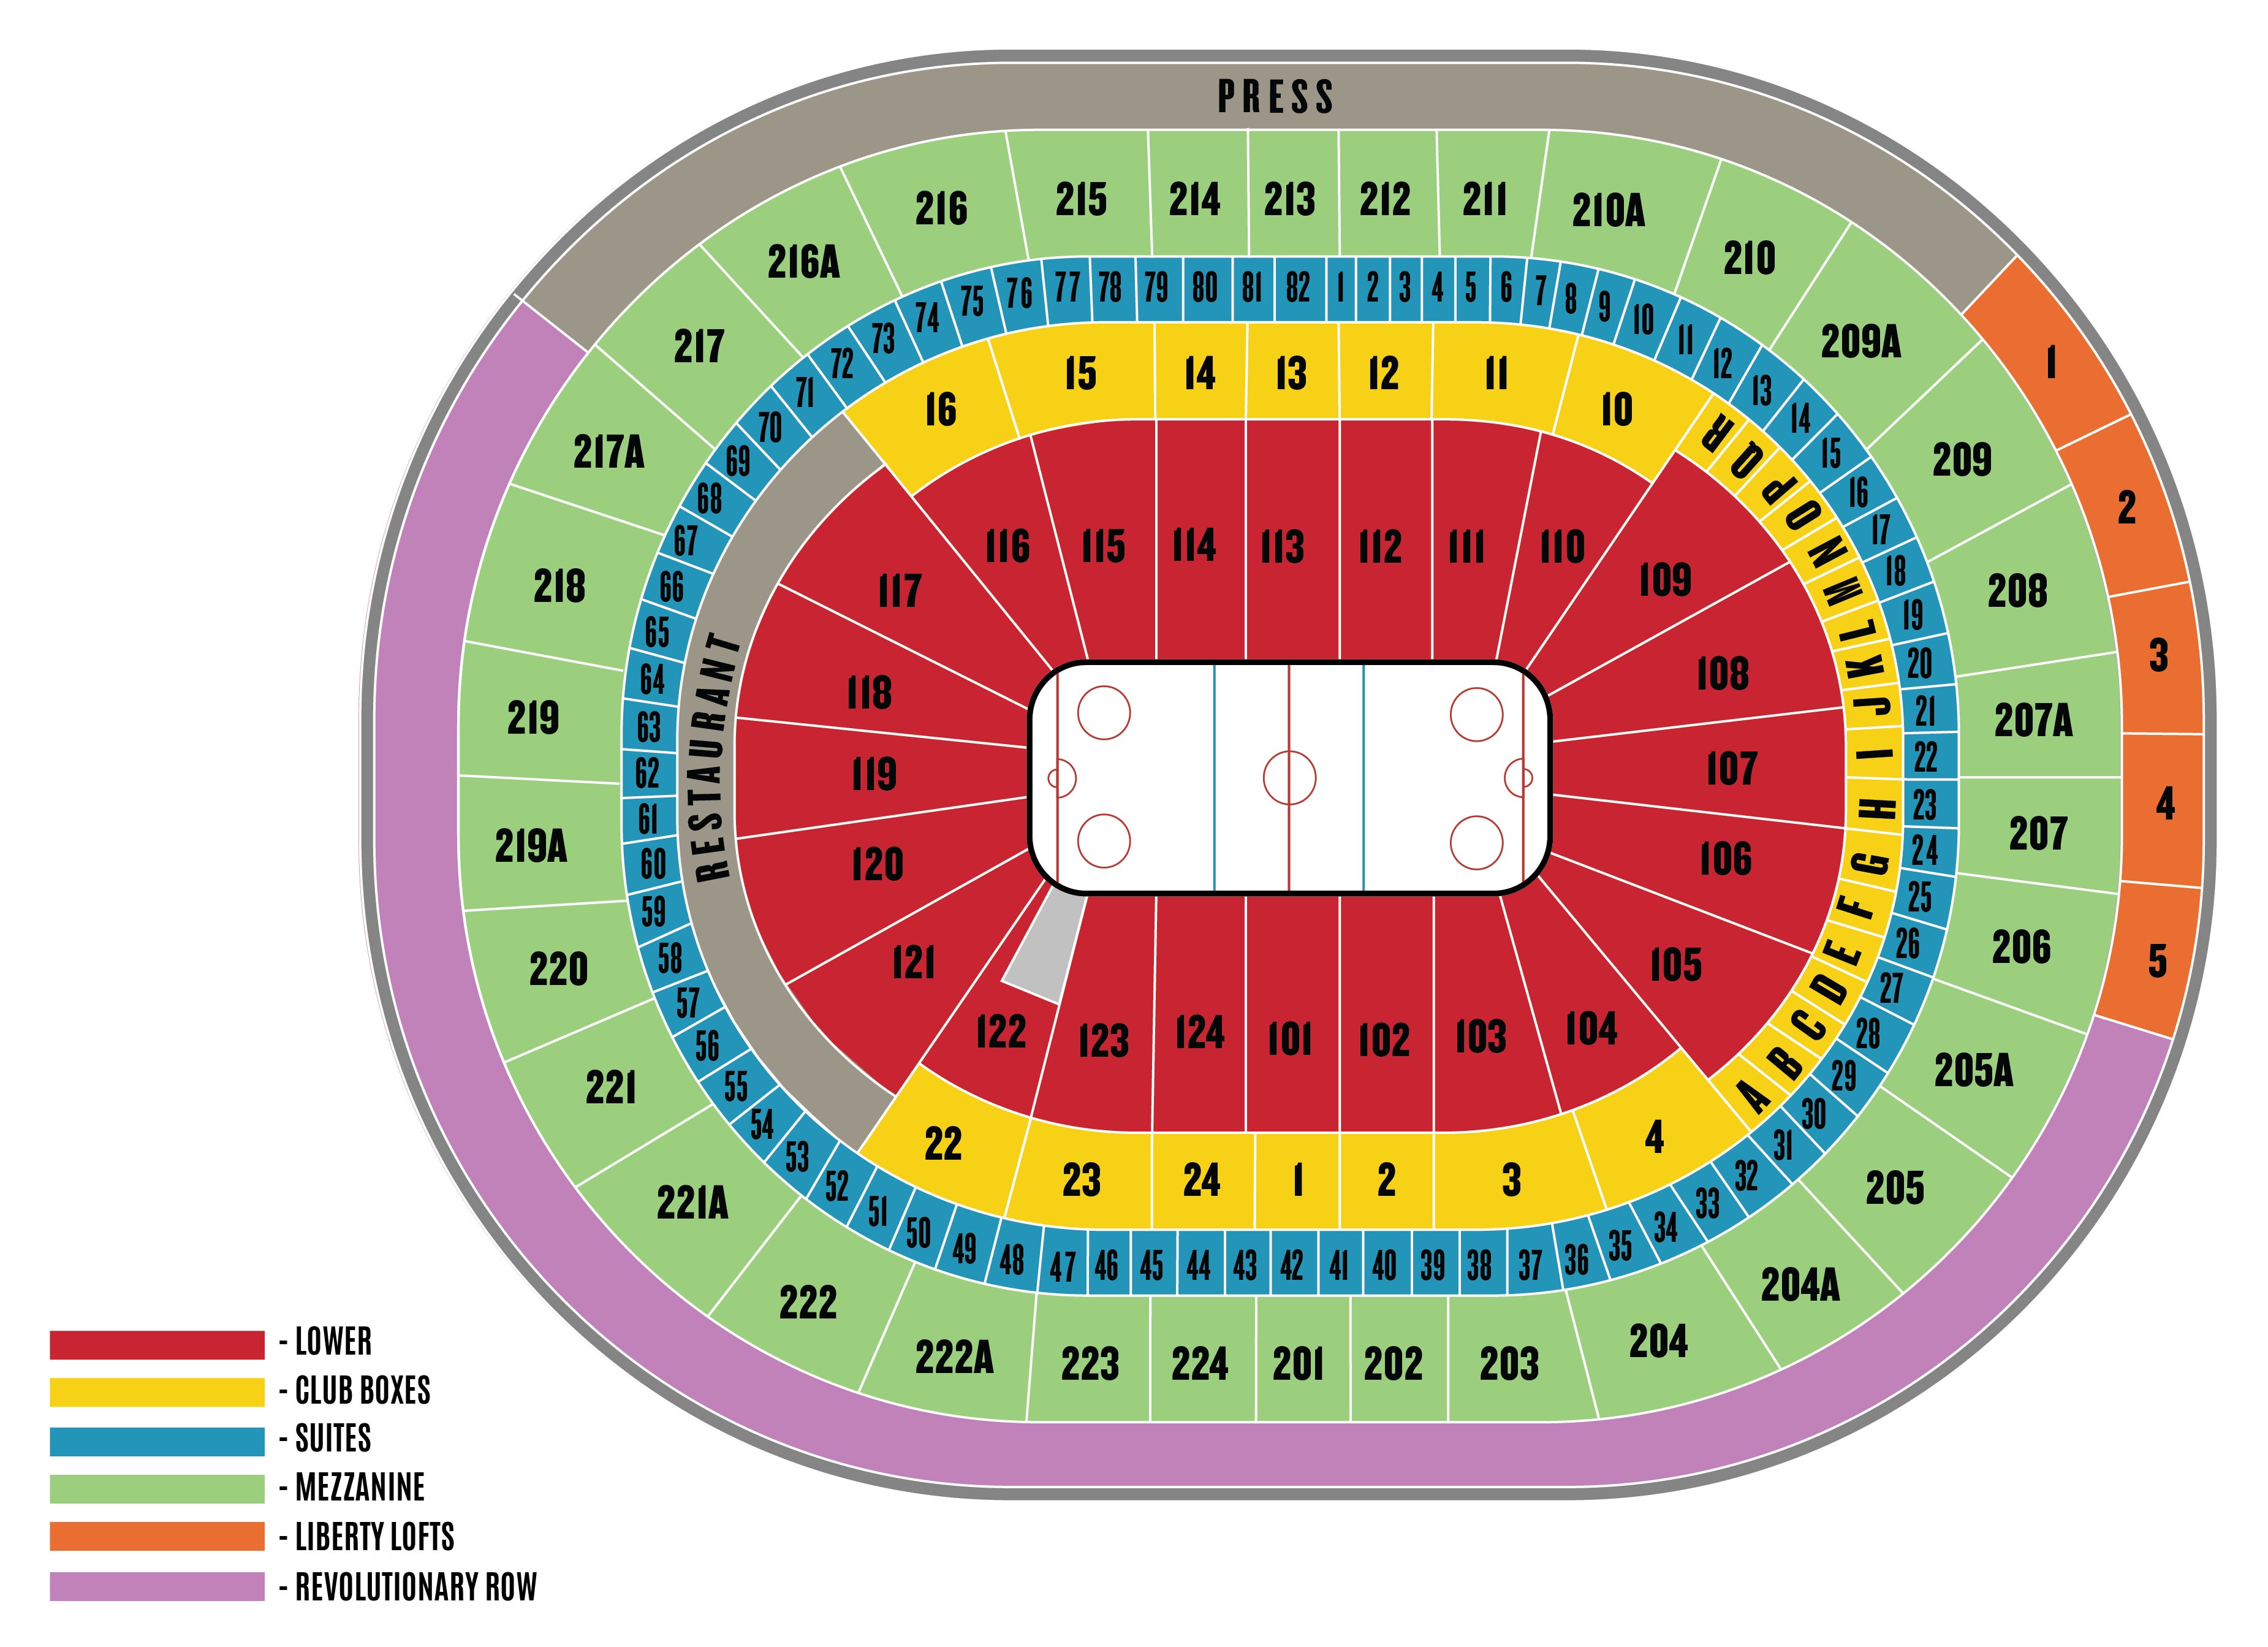 Details 102+ about toyota center seating chart rows unmissable in